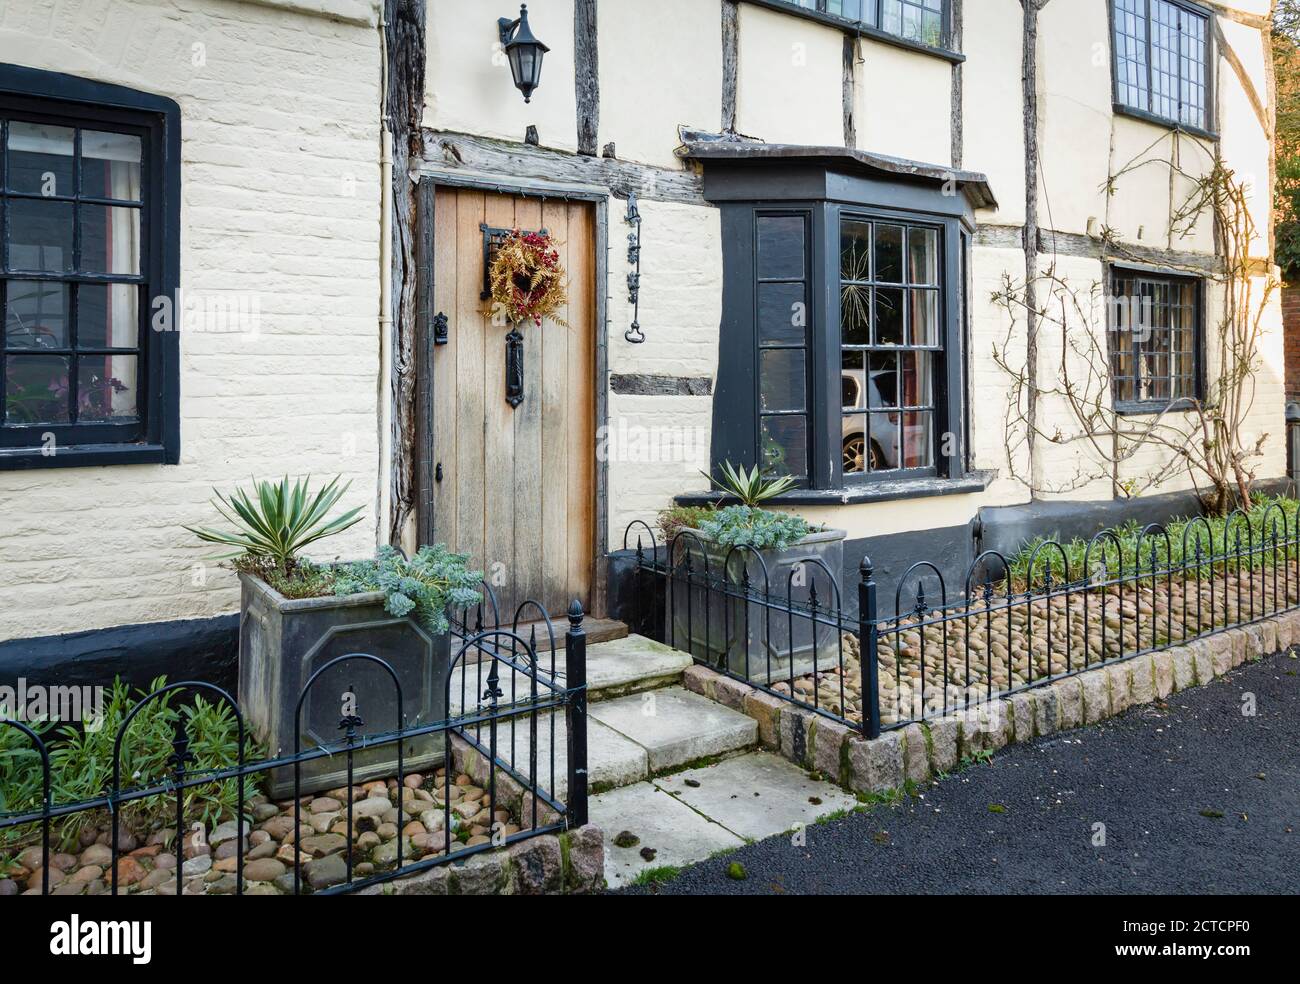 WINSLOW, UK - December 29, 2019. Facade of English period house or cottage in a historic UK town, with small front garden in Christmas, winter Stock Photo